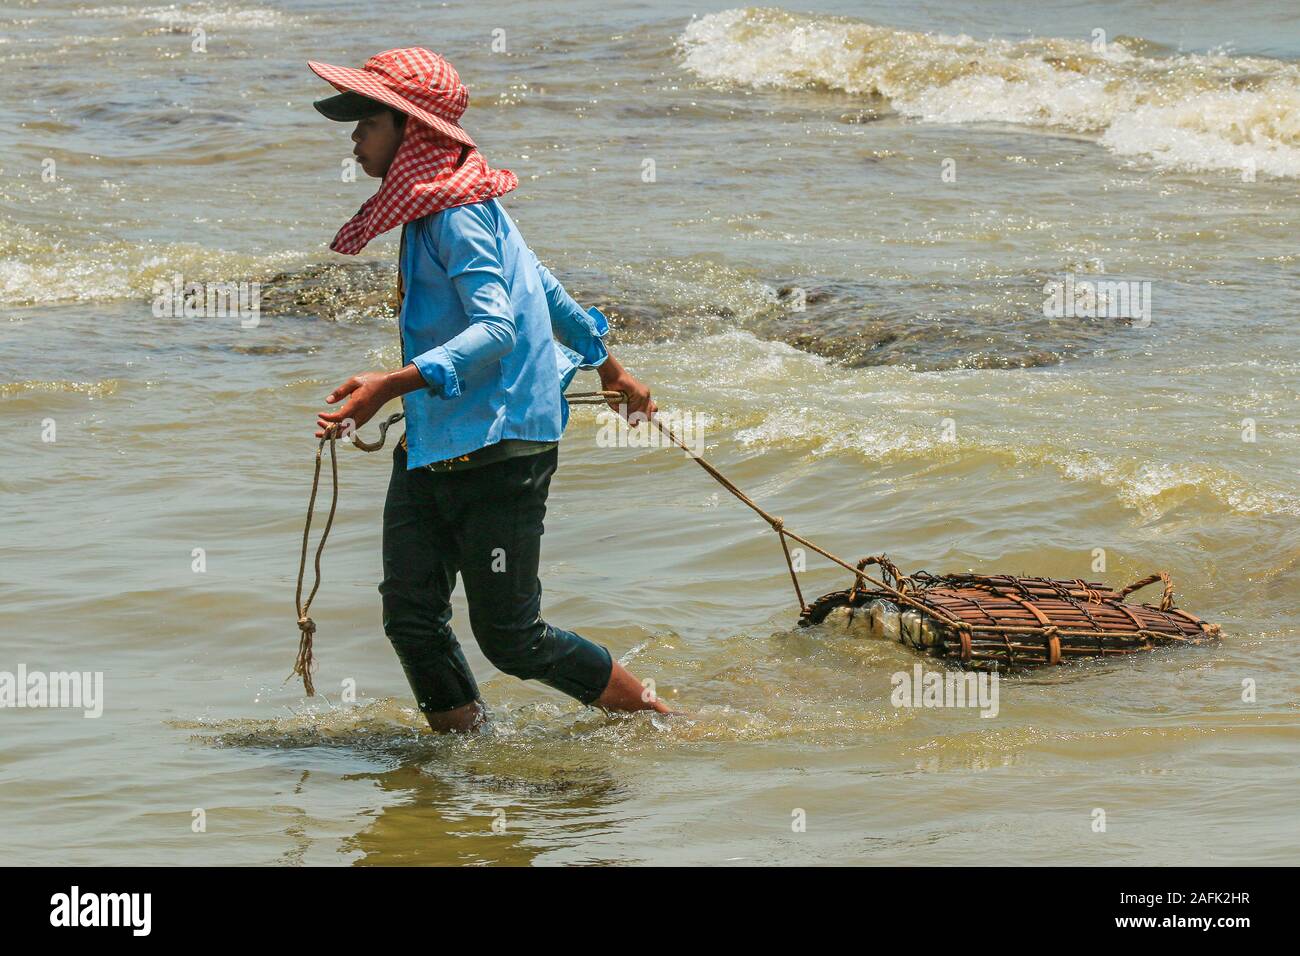 Fisherman in sun hat pulling a crab basket near the Crab Market at this resort known for it's seafood; Kep, Kep Province, Cambodia Stock Photo